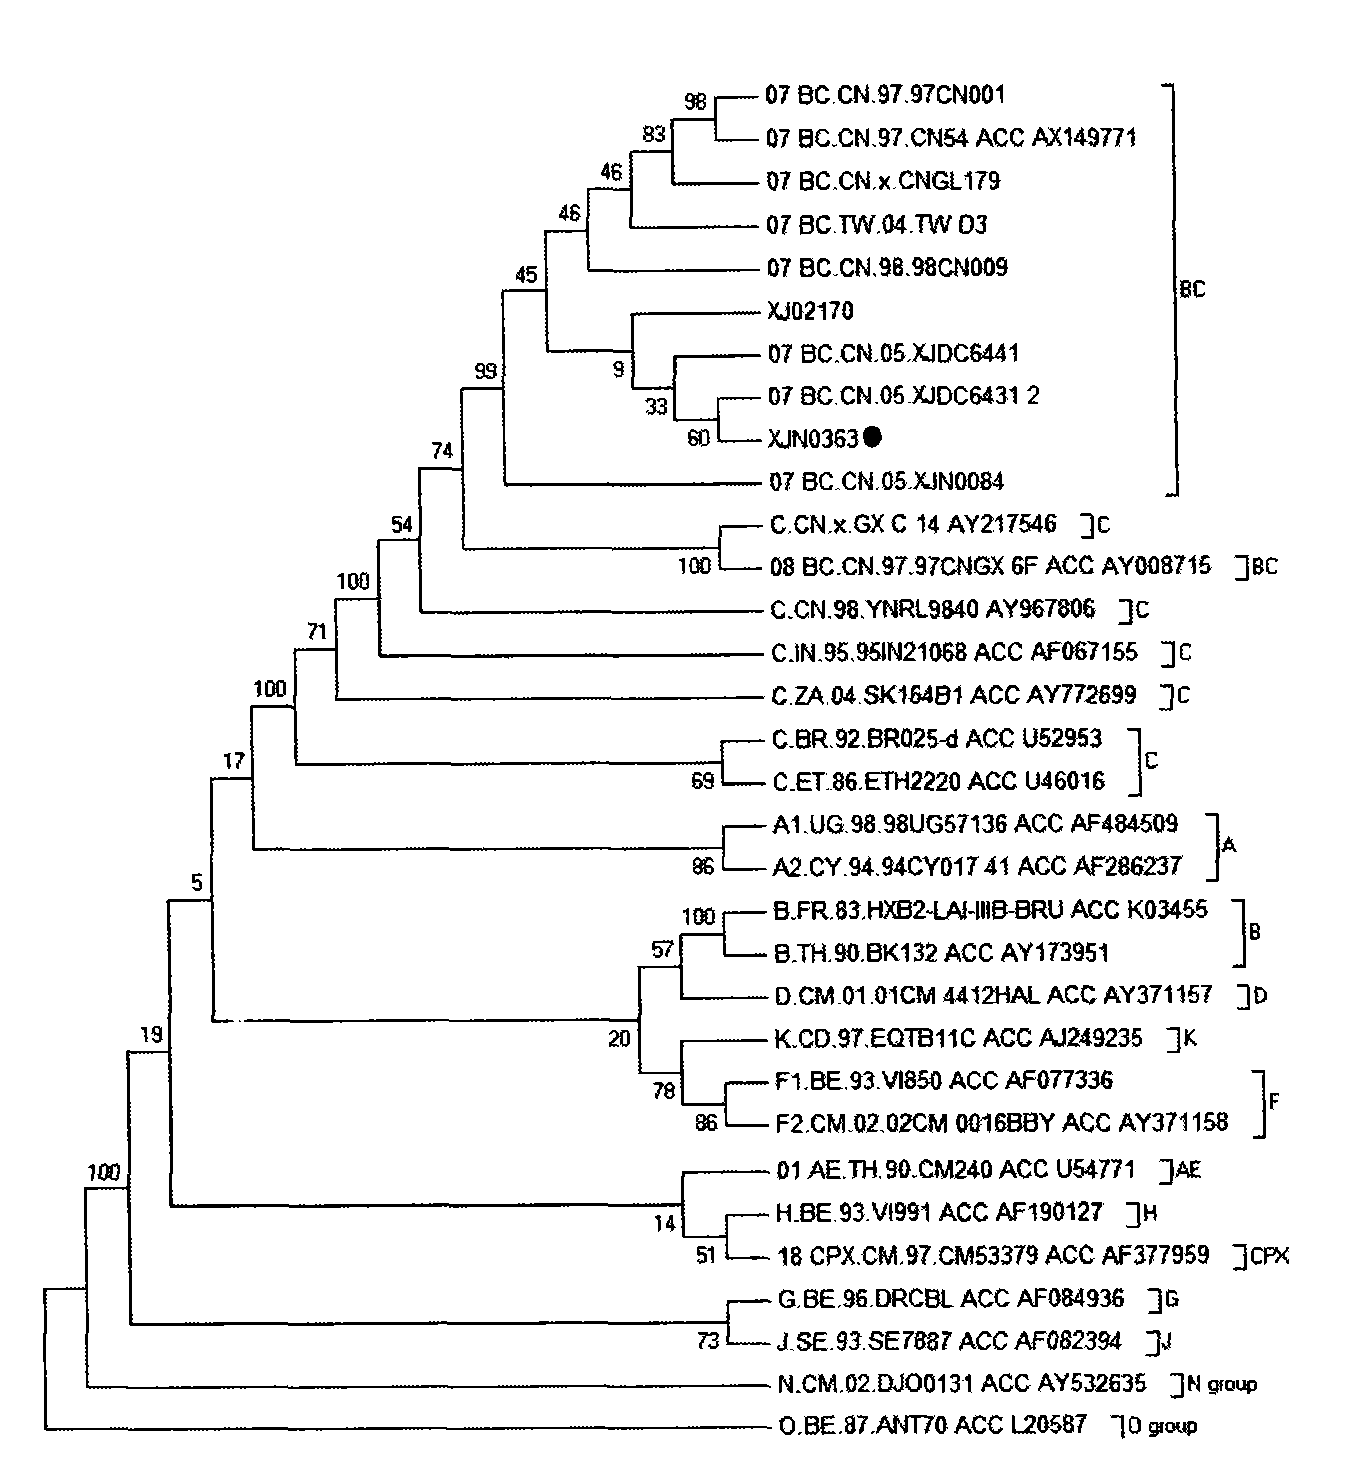 Chimeric simian/human immunodeficency virus strain and application thereof